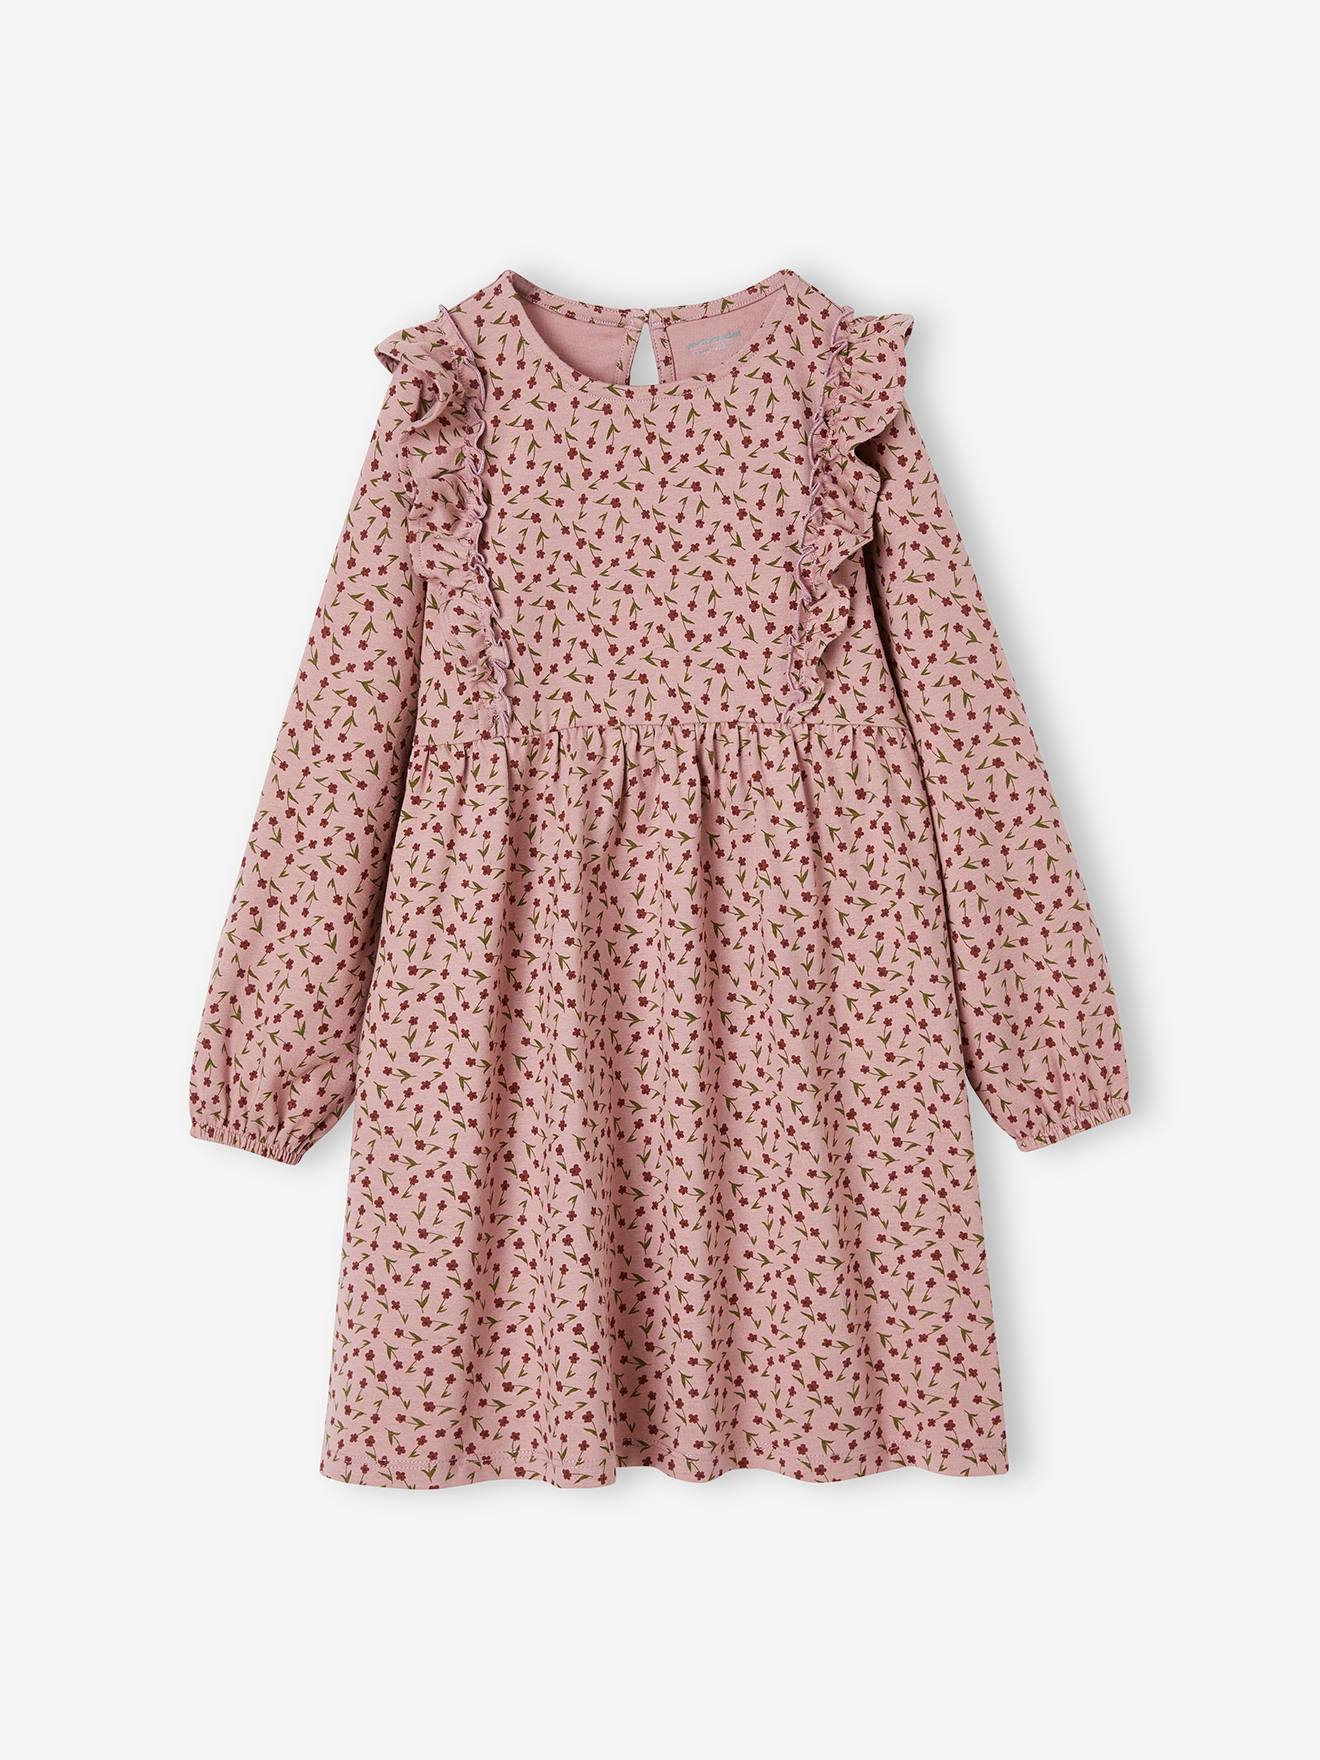 Floral Print Dress with Ruffled Sleeves for Girls old rose